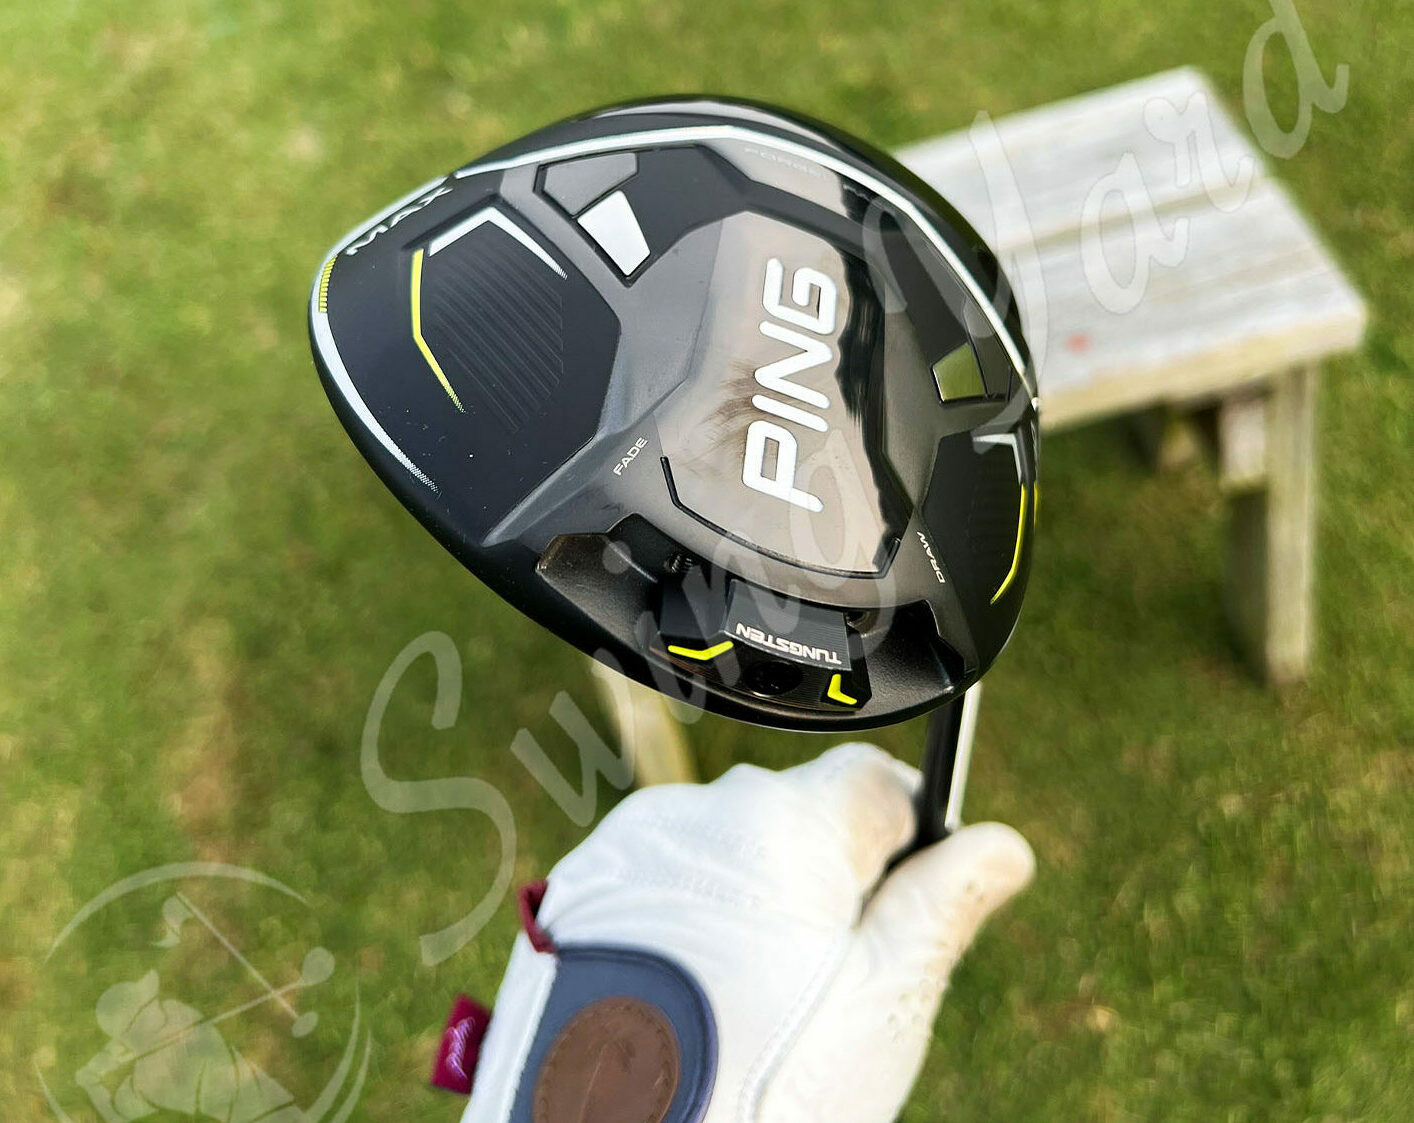 Me showing Ping G430 max driver clubhead at the golf course